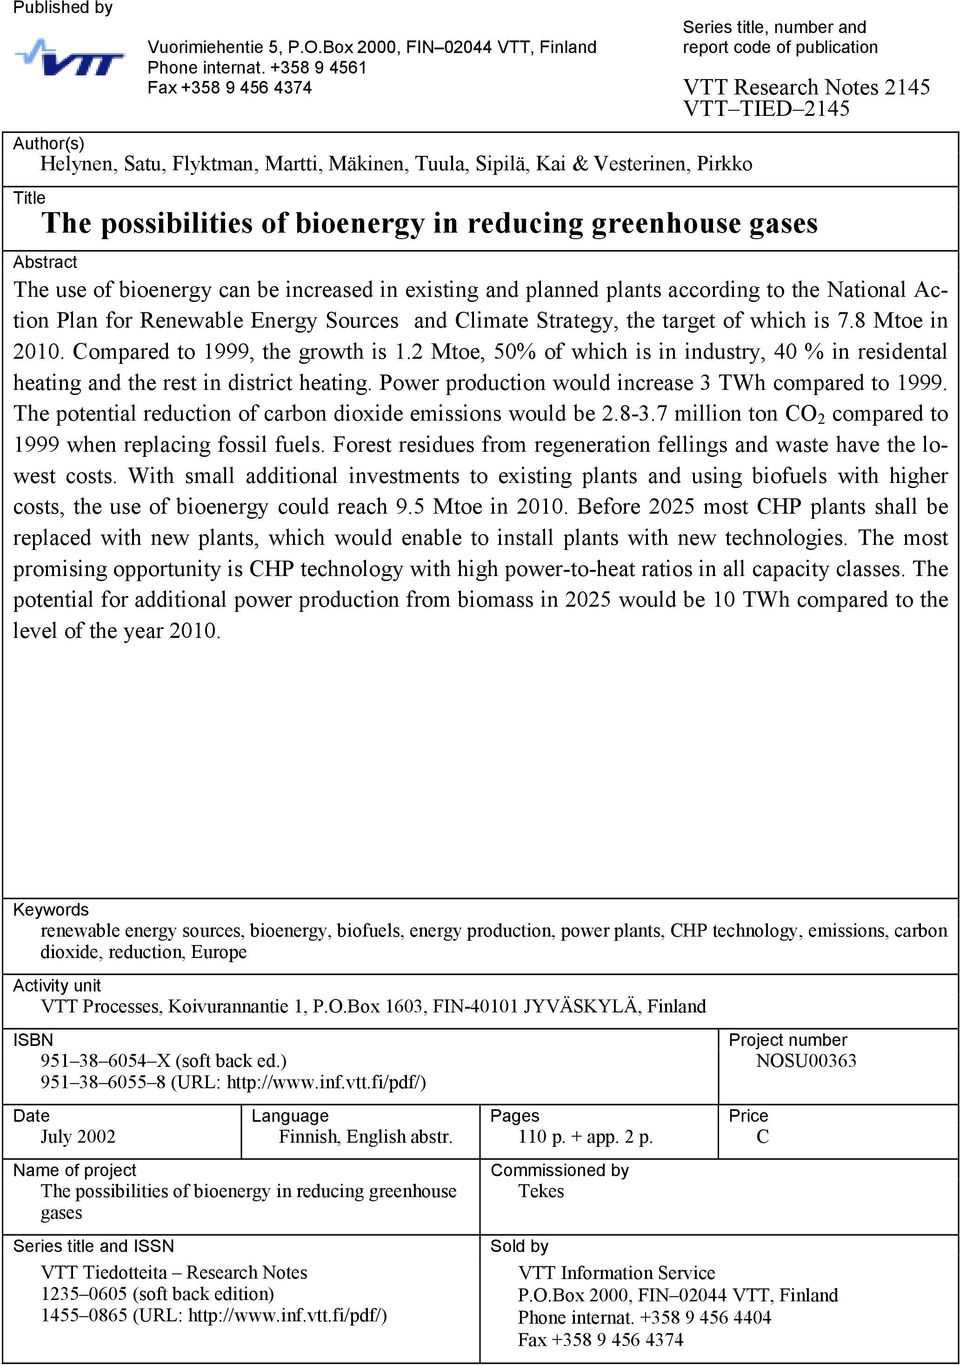 VTT TIED 2145 Title The possibilities of bioenergy in reducing greenhouse gases Abstract The use of bioenergy can be increased in existing and planned plants according to the National Action Plan for